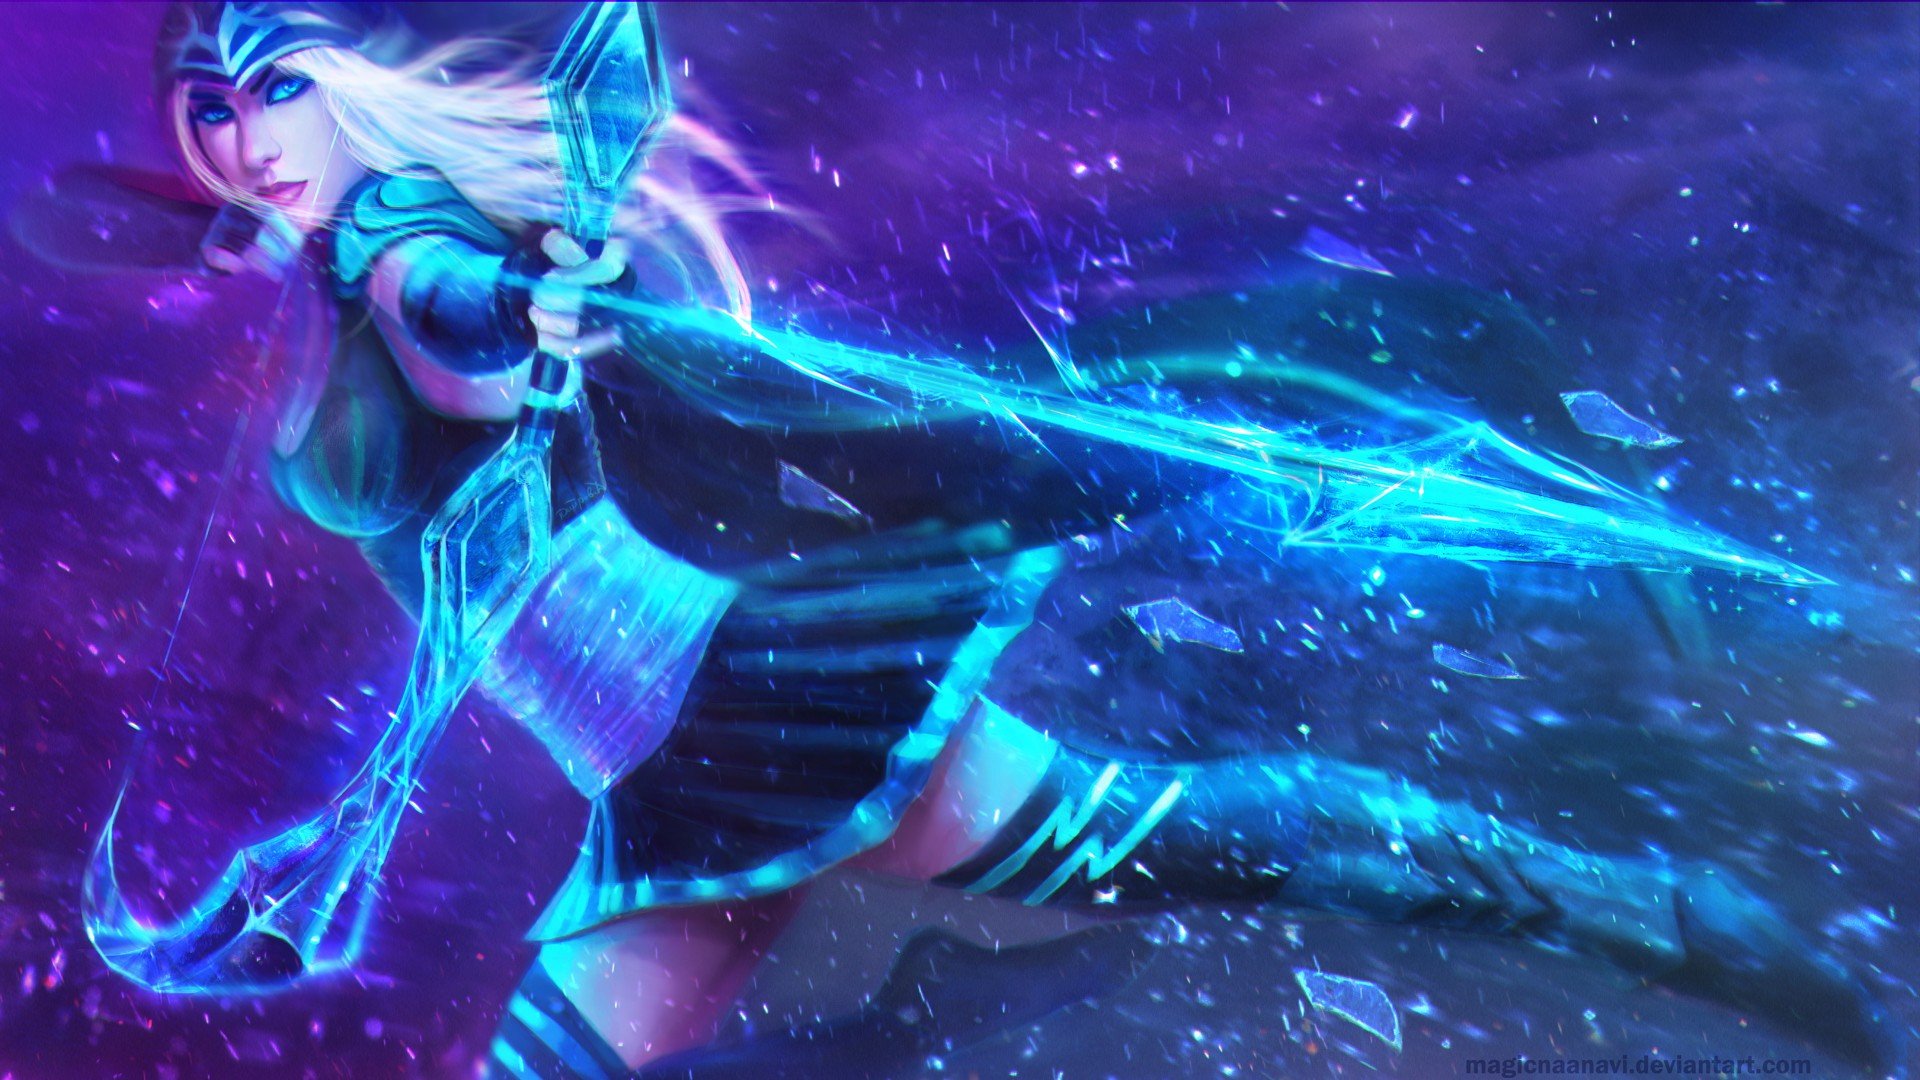 anime girls, Anime, Realistic, Render, League of Legends, Ashe, MagicnaAnavi, Bow and arrow, Short skirt Wallpaper